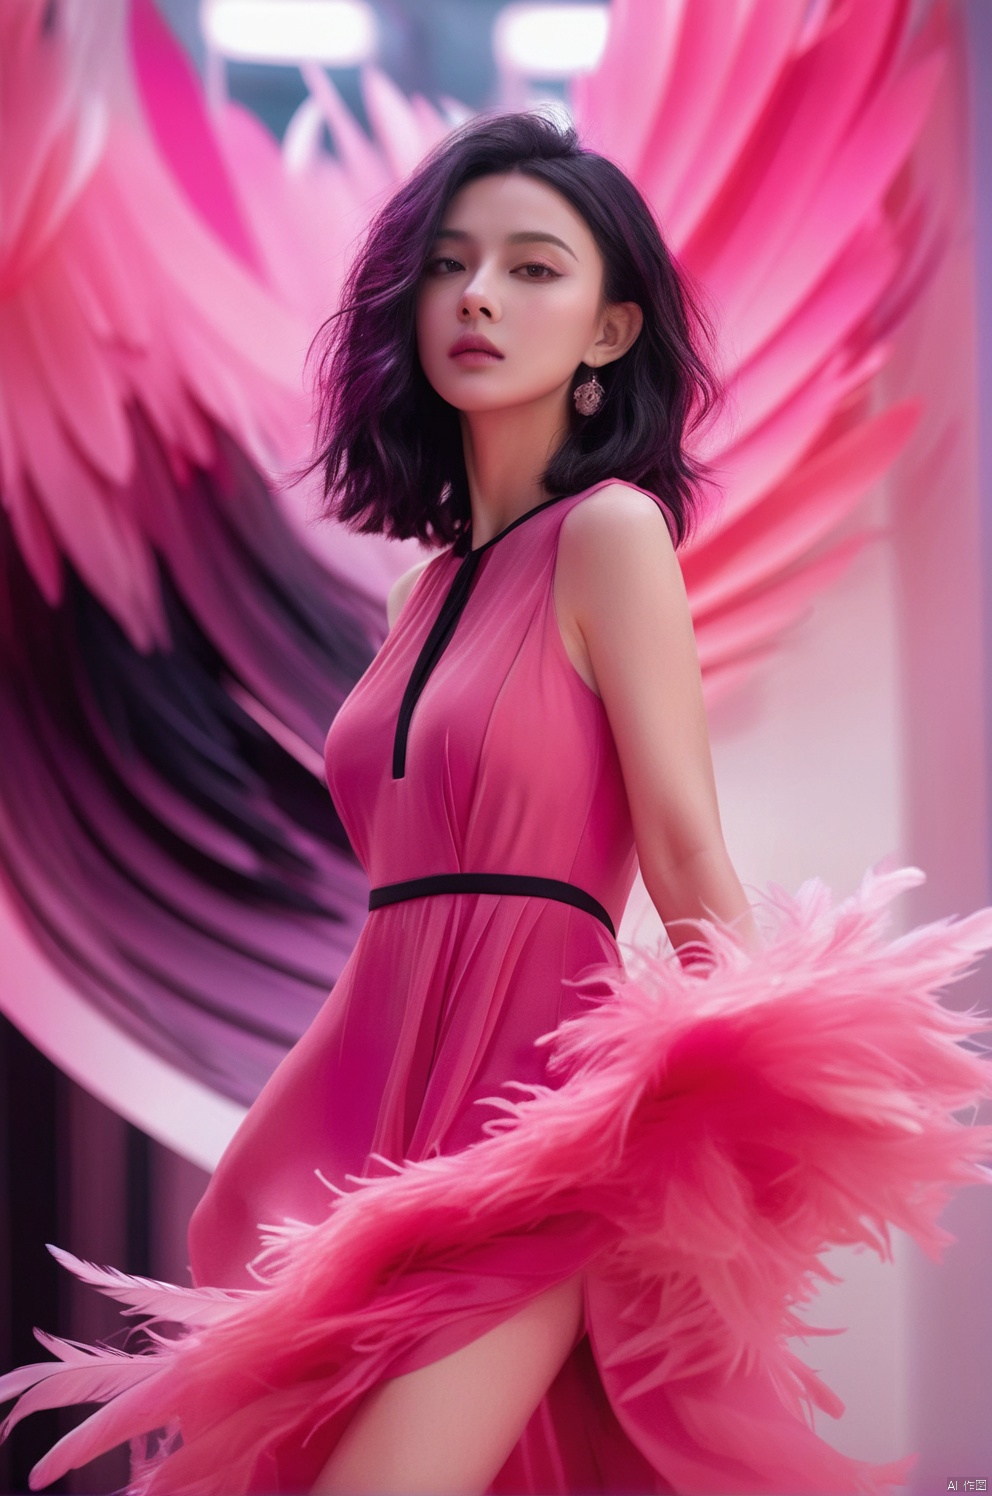 Girl, Erjie, girl in a fluid and dynamic pose, wearing a loose, flowing pink dress, mysterious expression, curly black and pink hair, [Zhang Ziyi| Aishwarya Rai], in a modern and abstract setting, with bold and colorful abstract art, blurred background, bright lighting, official art, uniform 8k wallpaper,(Feathers everywhere :1.3), depth of field level,